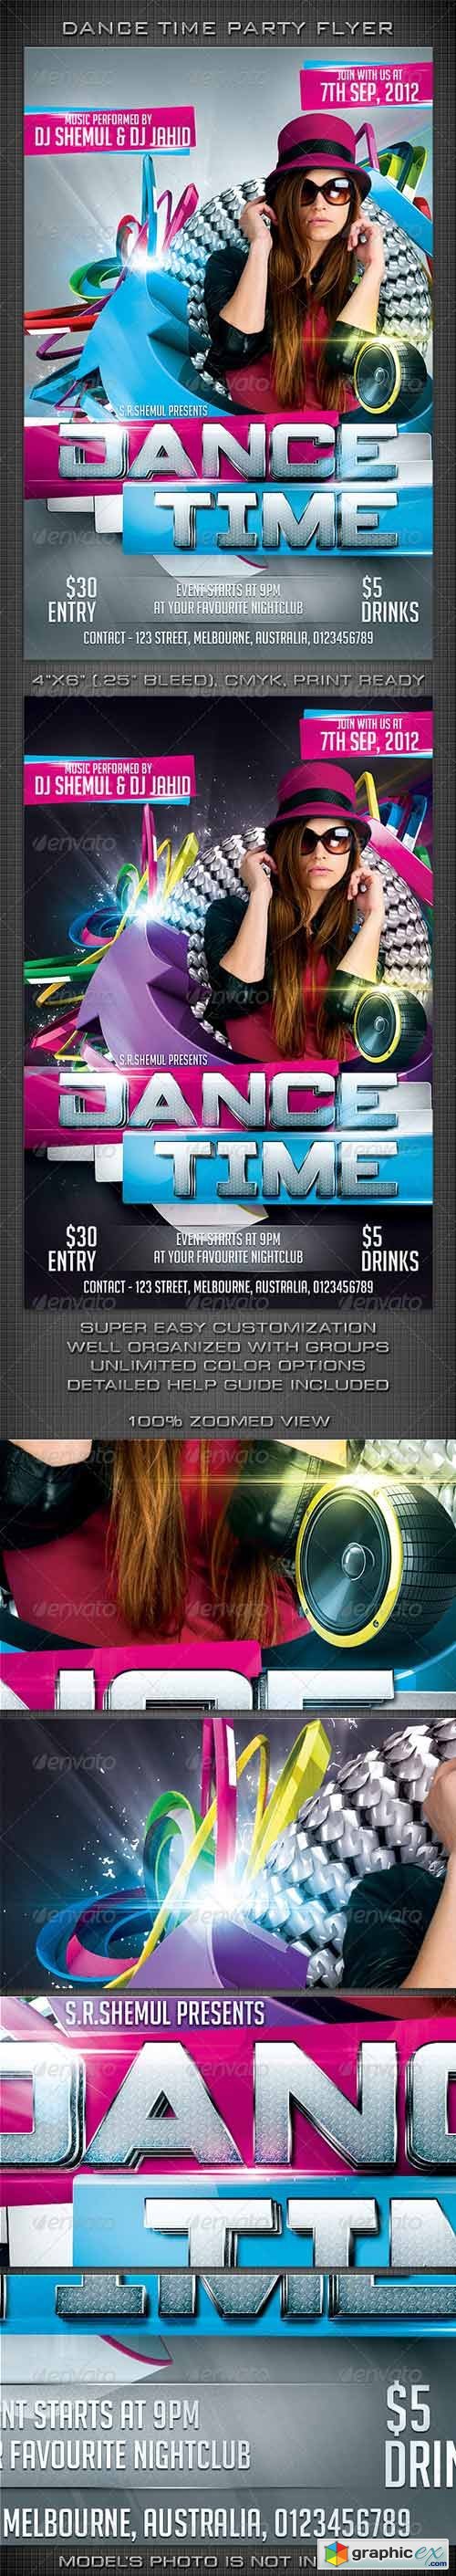 Dance Time Flyer Template